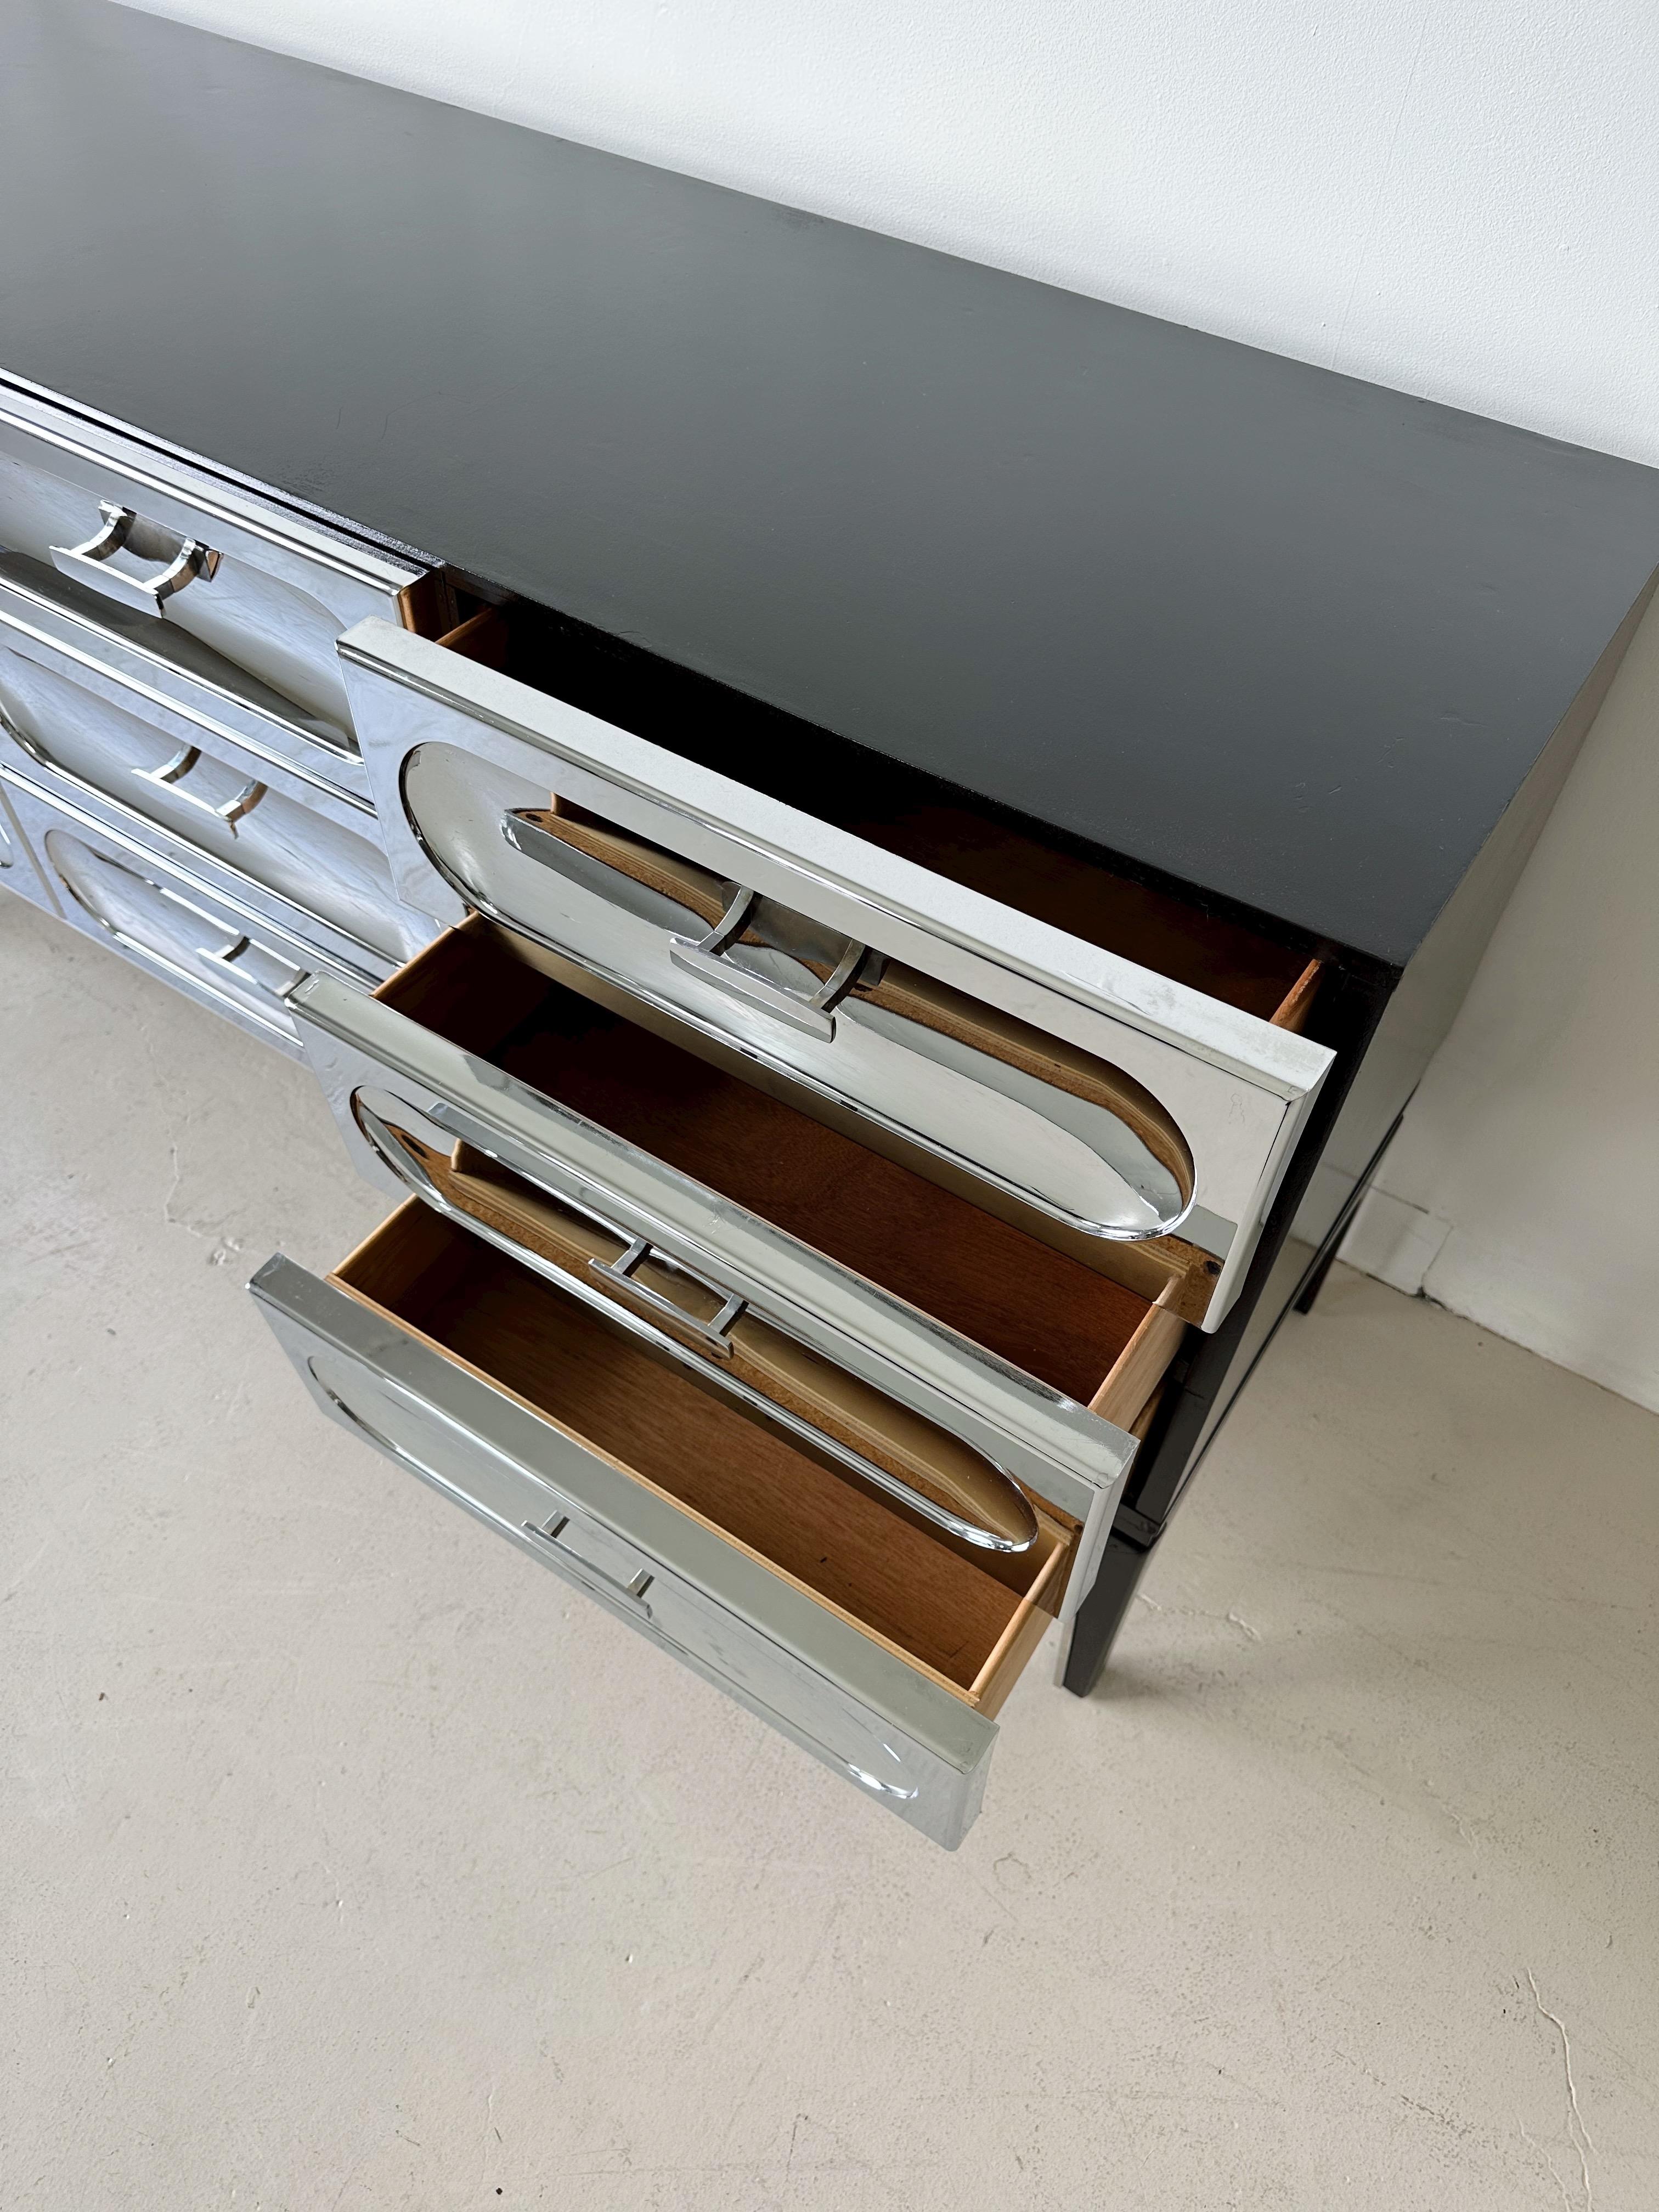 Space Age Chrome & Black 9 Drawer Dresser by Henri Vallières, 60's

//

Dimensions:
59”W x 20”D x 31.5”H 

From the floor to the bottom of the dresser 9.5